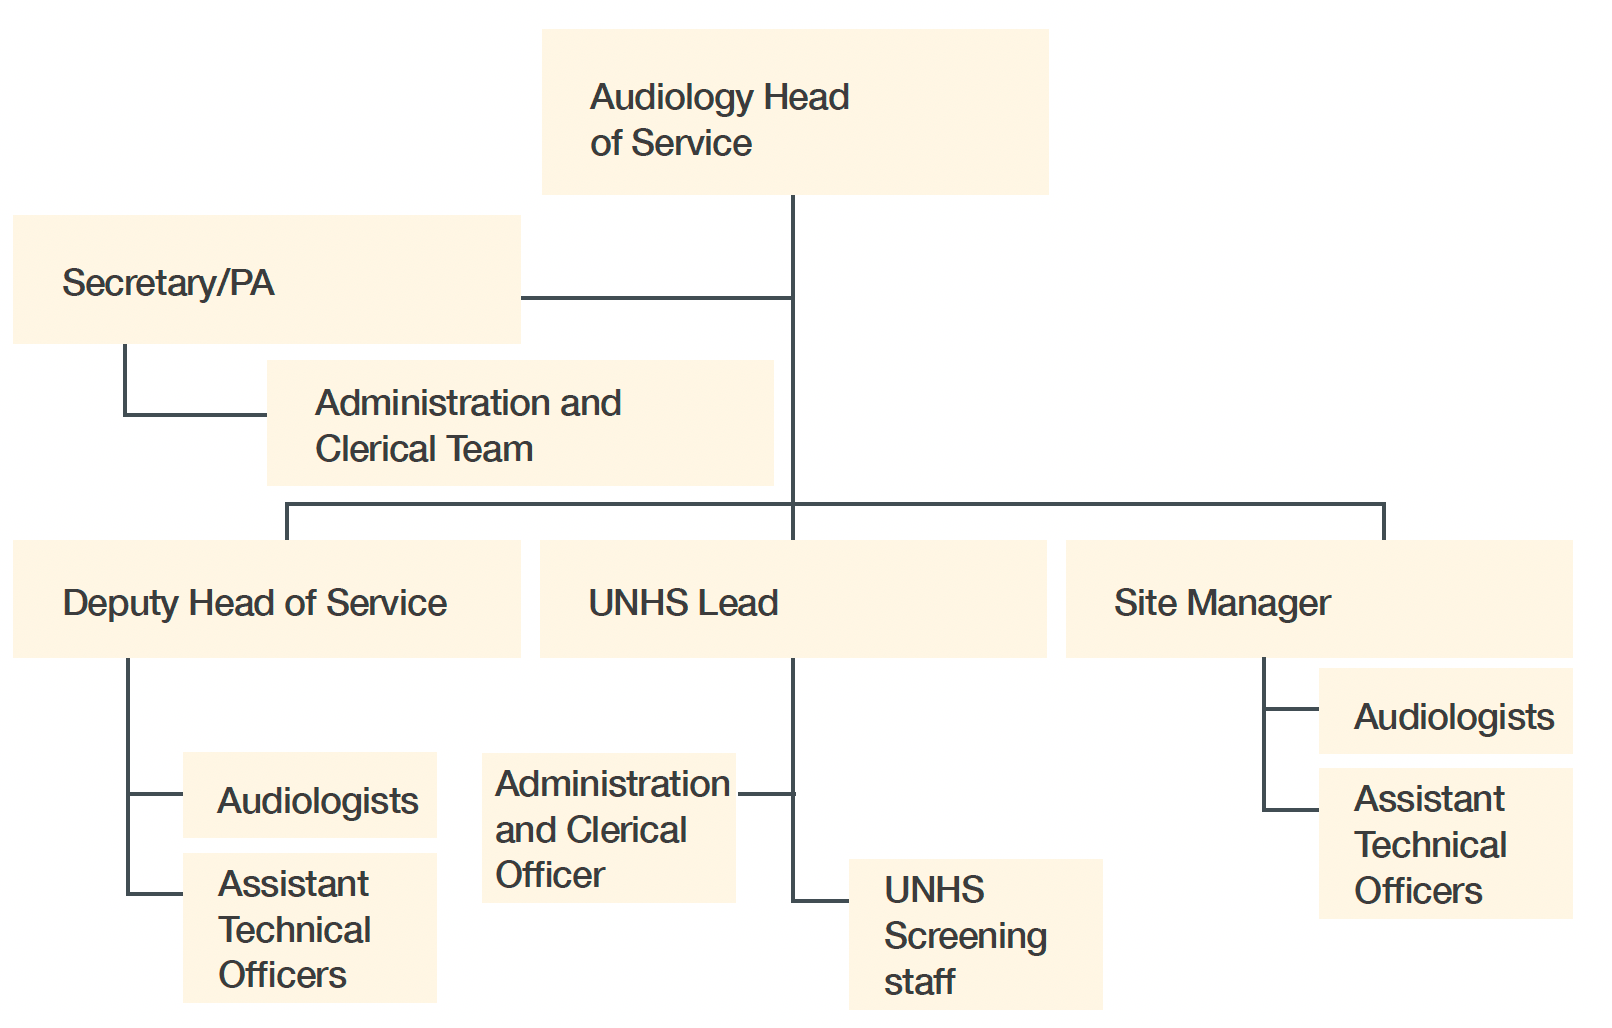 image shows a typical structure for an audiology service within Health Boards.